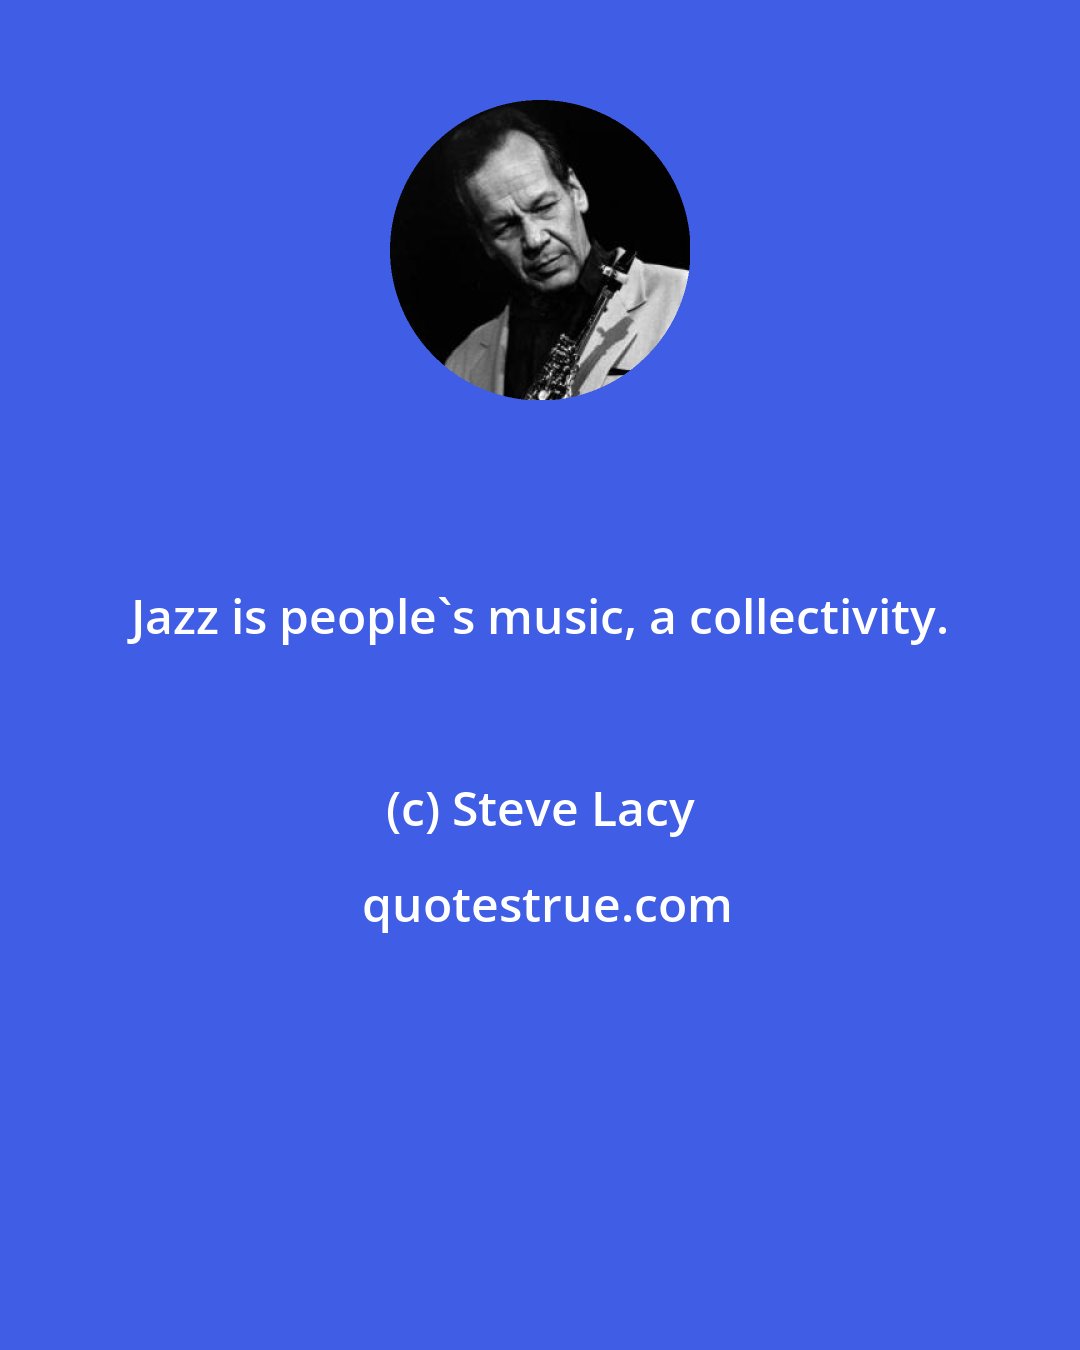 Steve Lacy: Jazz is people's music, a collectivity.